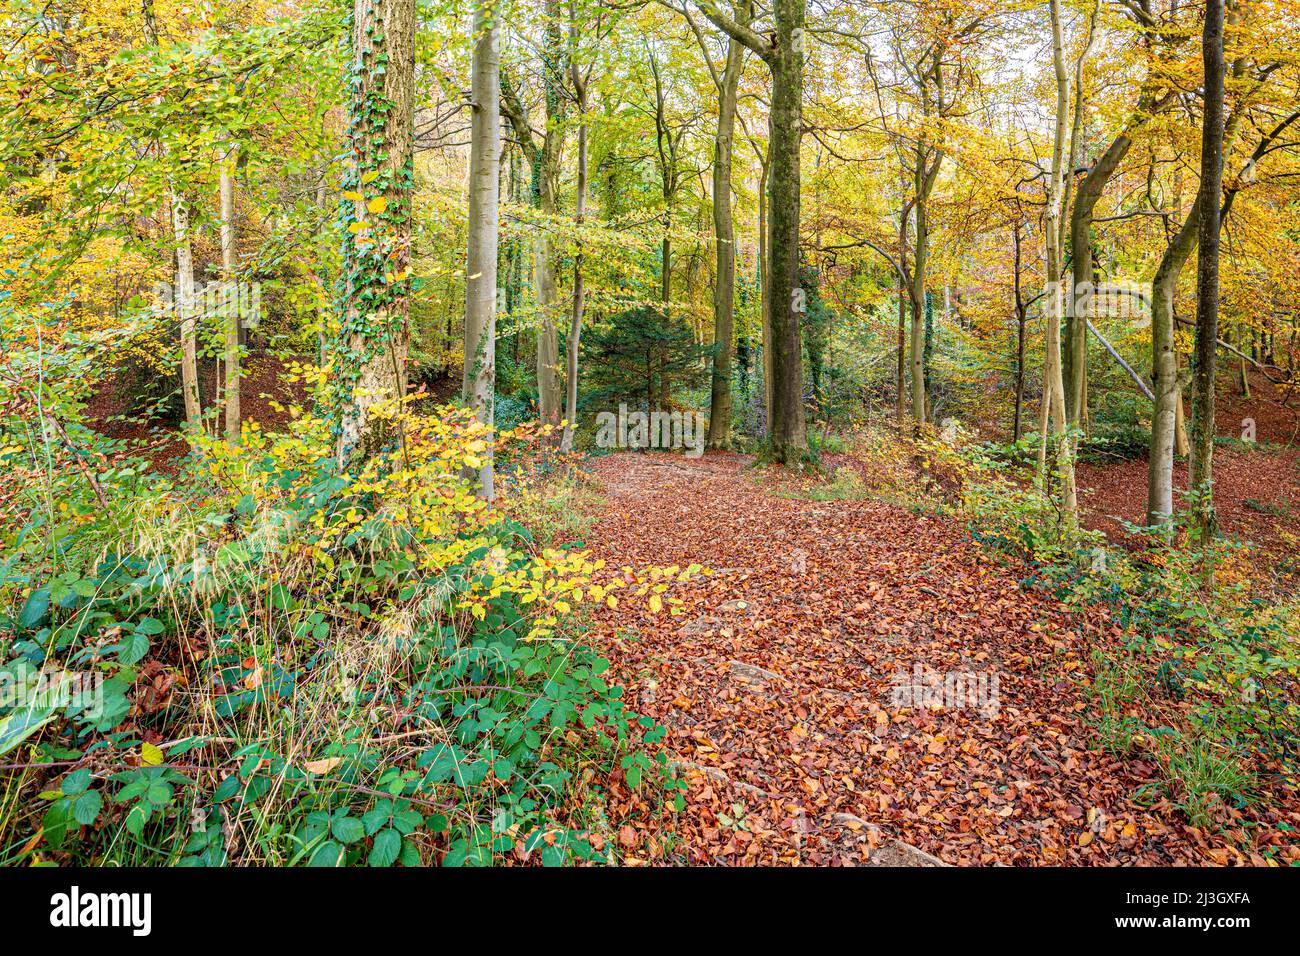 Autumn in the Cotswolds - TA footpath through beech woodland on Kites Hill near Prinknash Abbey, Gloucestershire, England UK Stock Photo